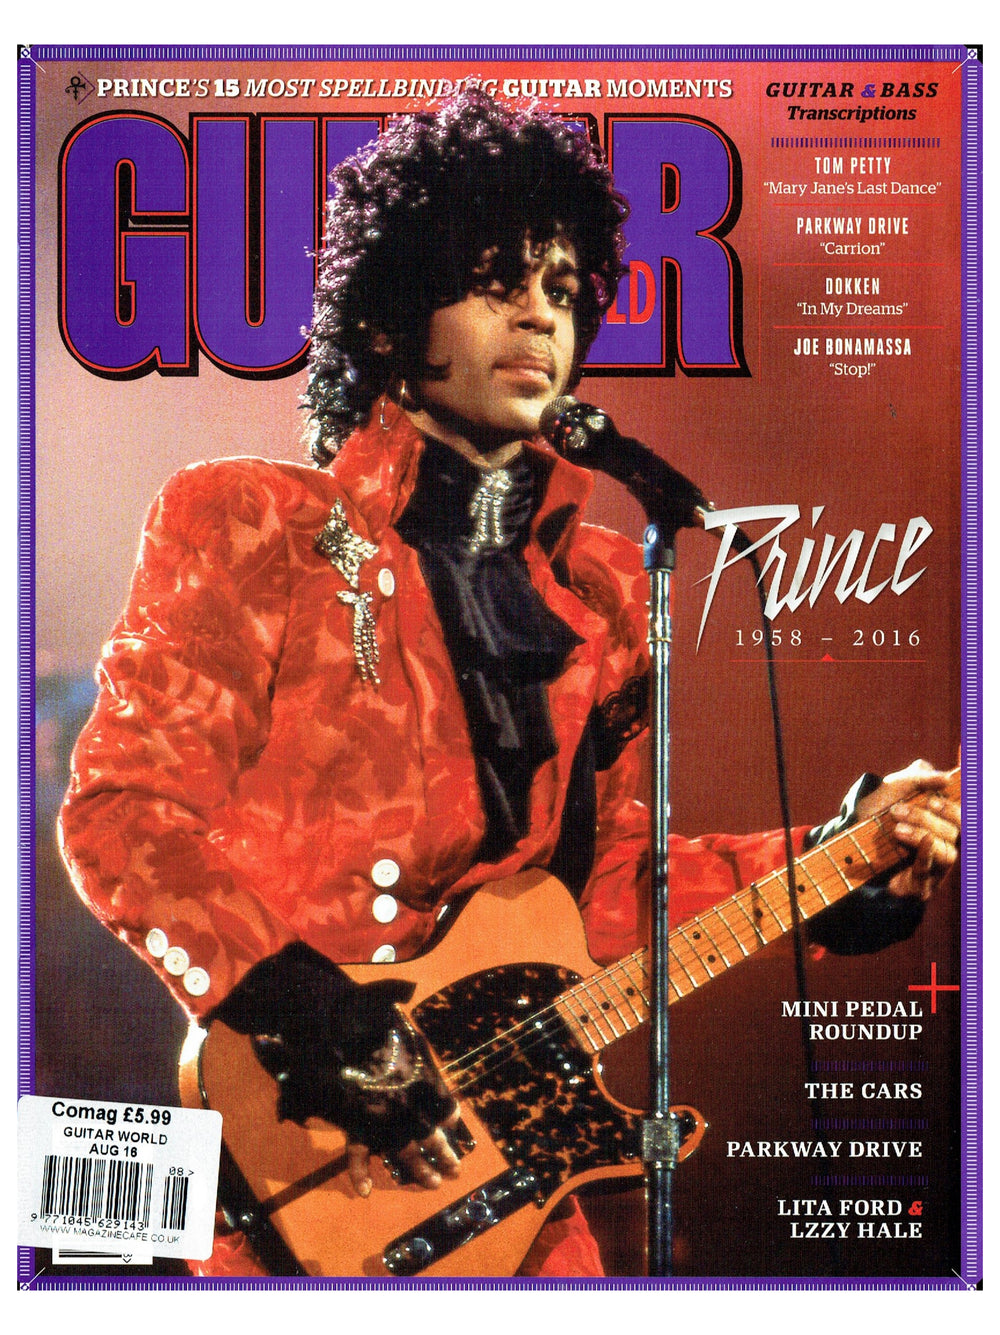 Prince Guitar World Magazine August 16th 2016 Cover Picture & 14 Page Article